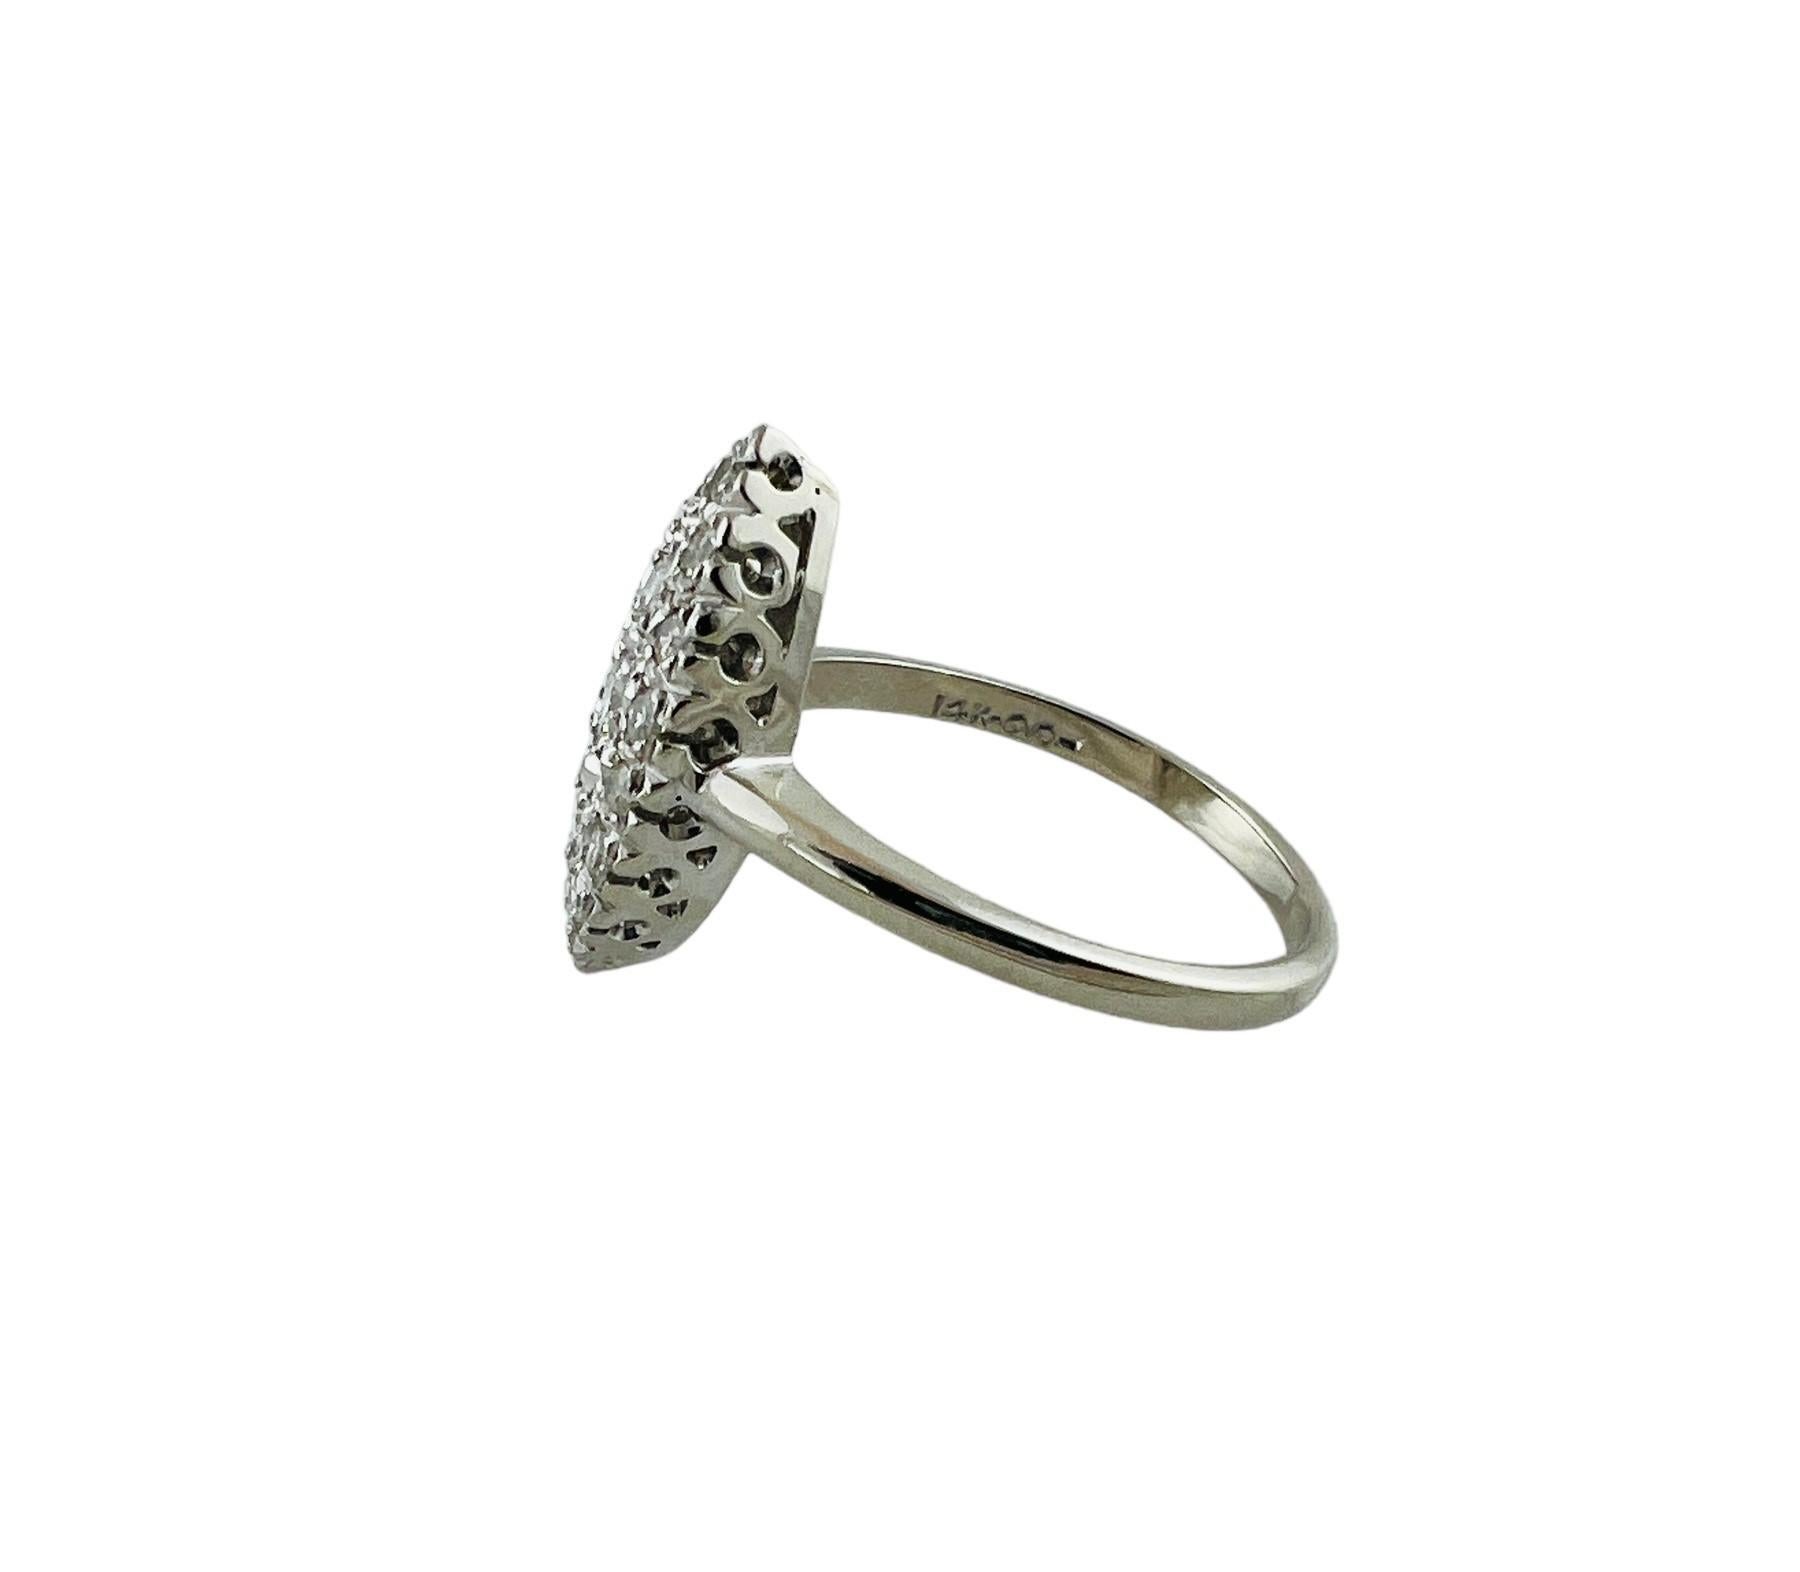 14K White Gold Diamond Cluster Ring Size 7.5 #16542 For Sale 1